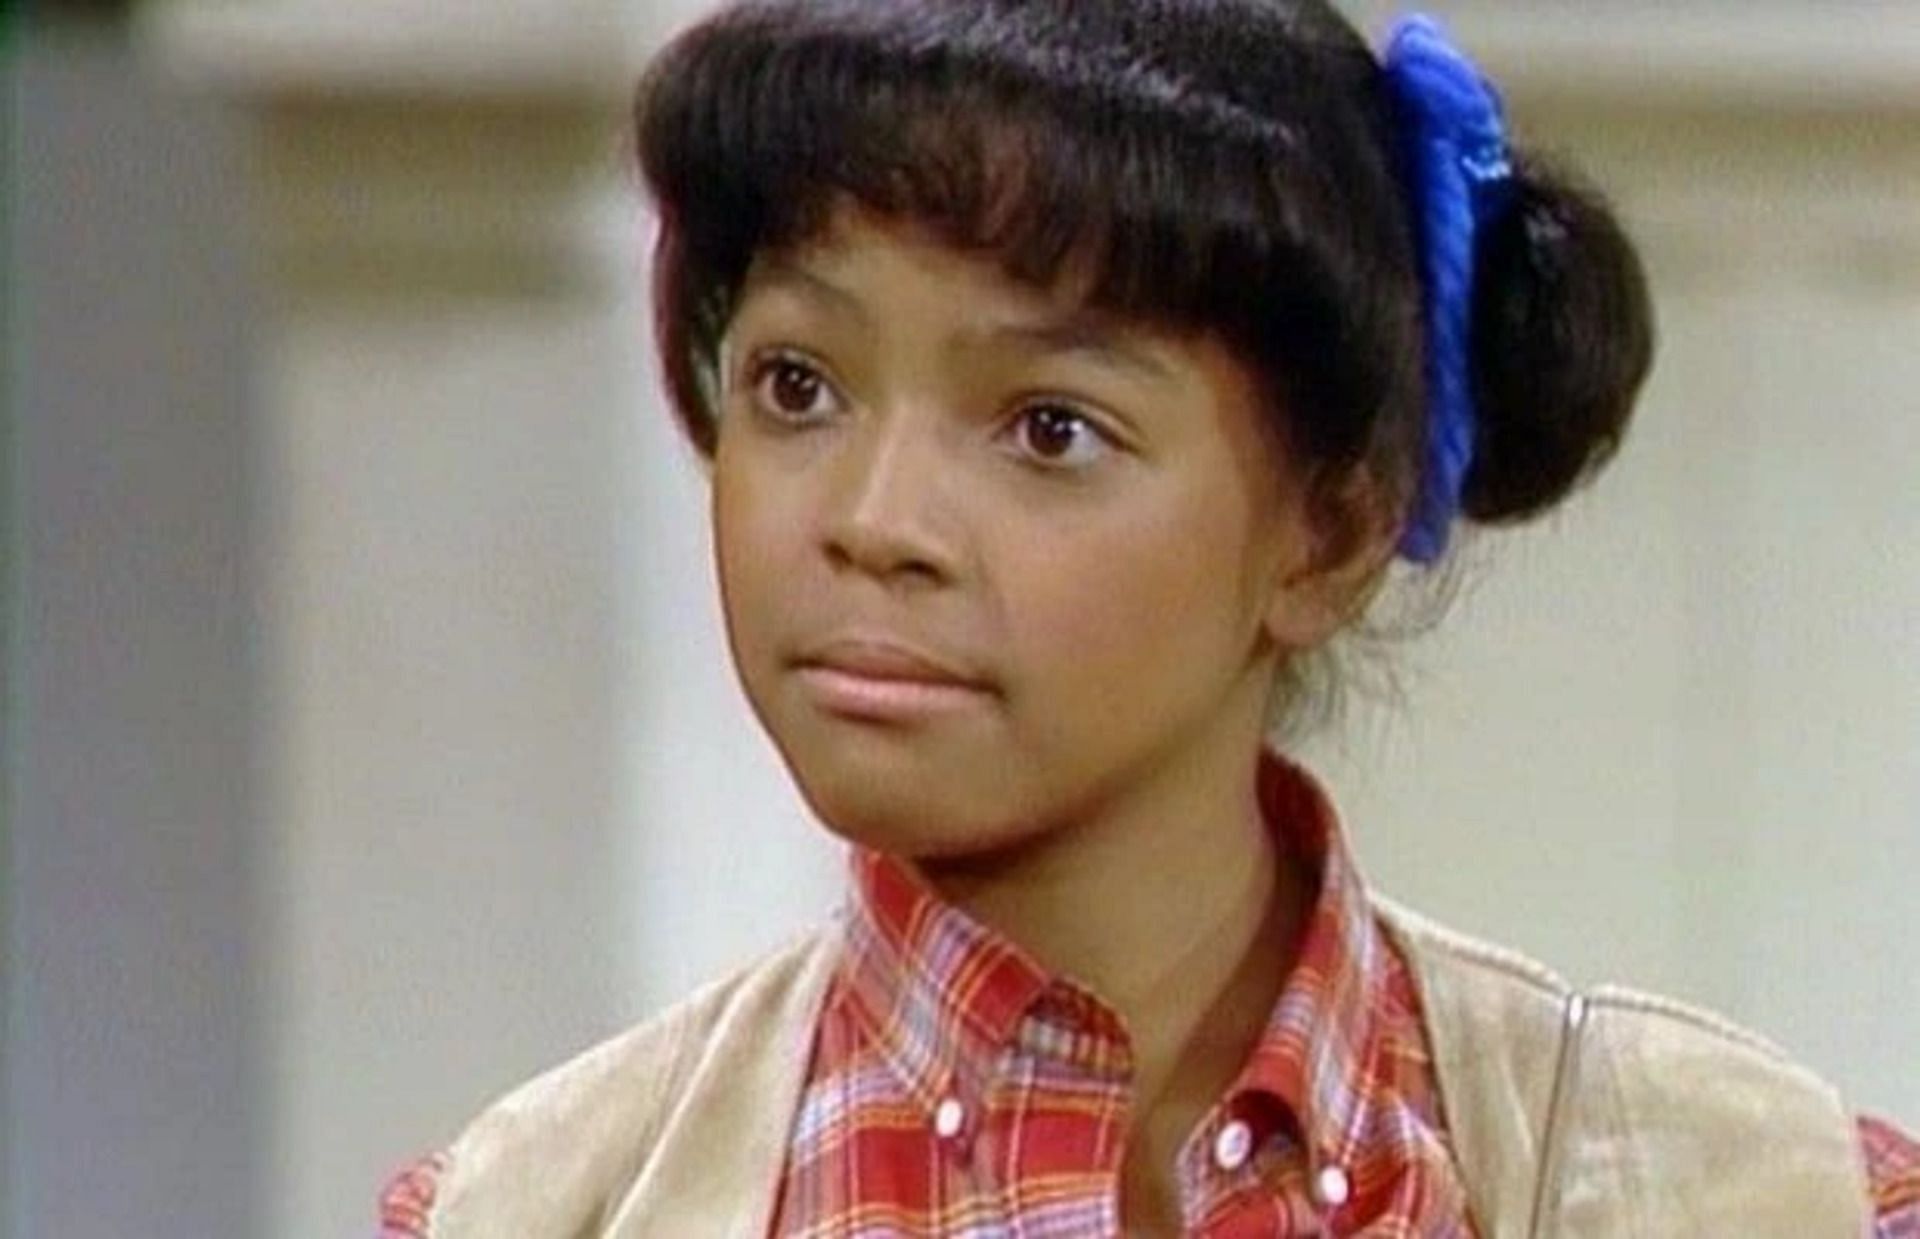 Tootie was played by actress Kim Fields throughout the run of the series (Image via NBC)